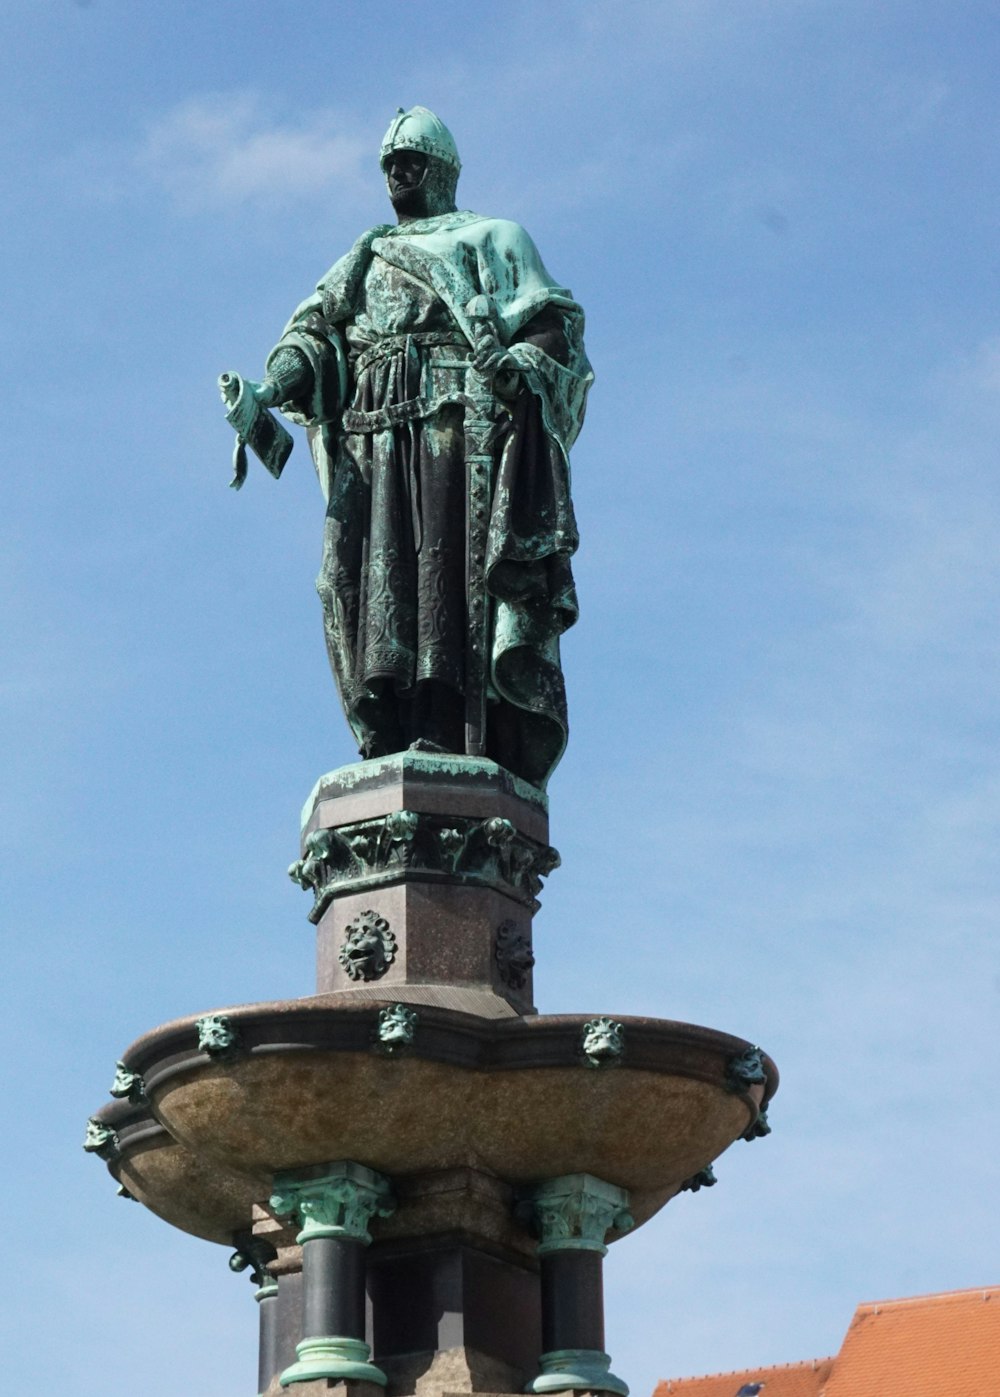 a statue of a man standing on top of a fountain